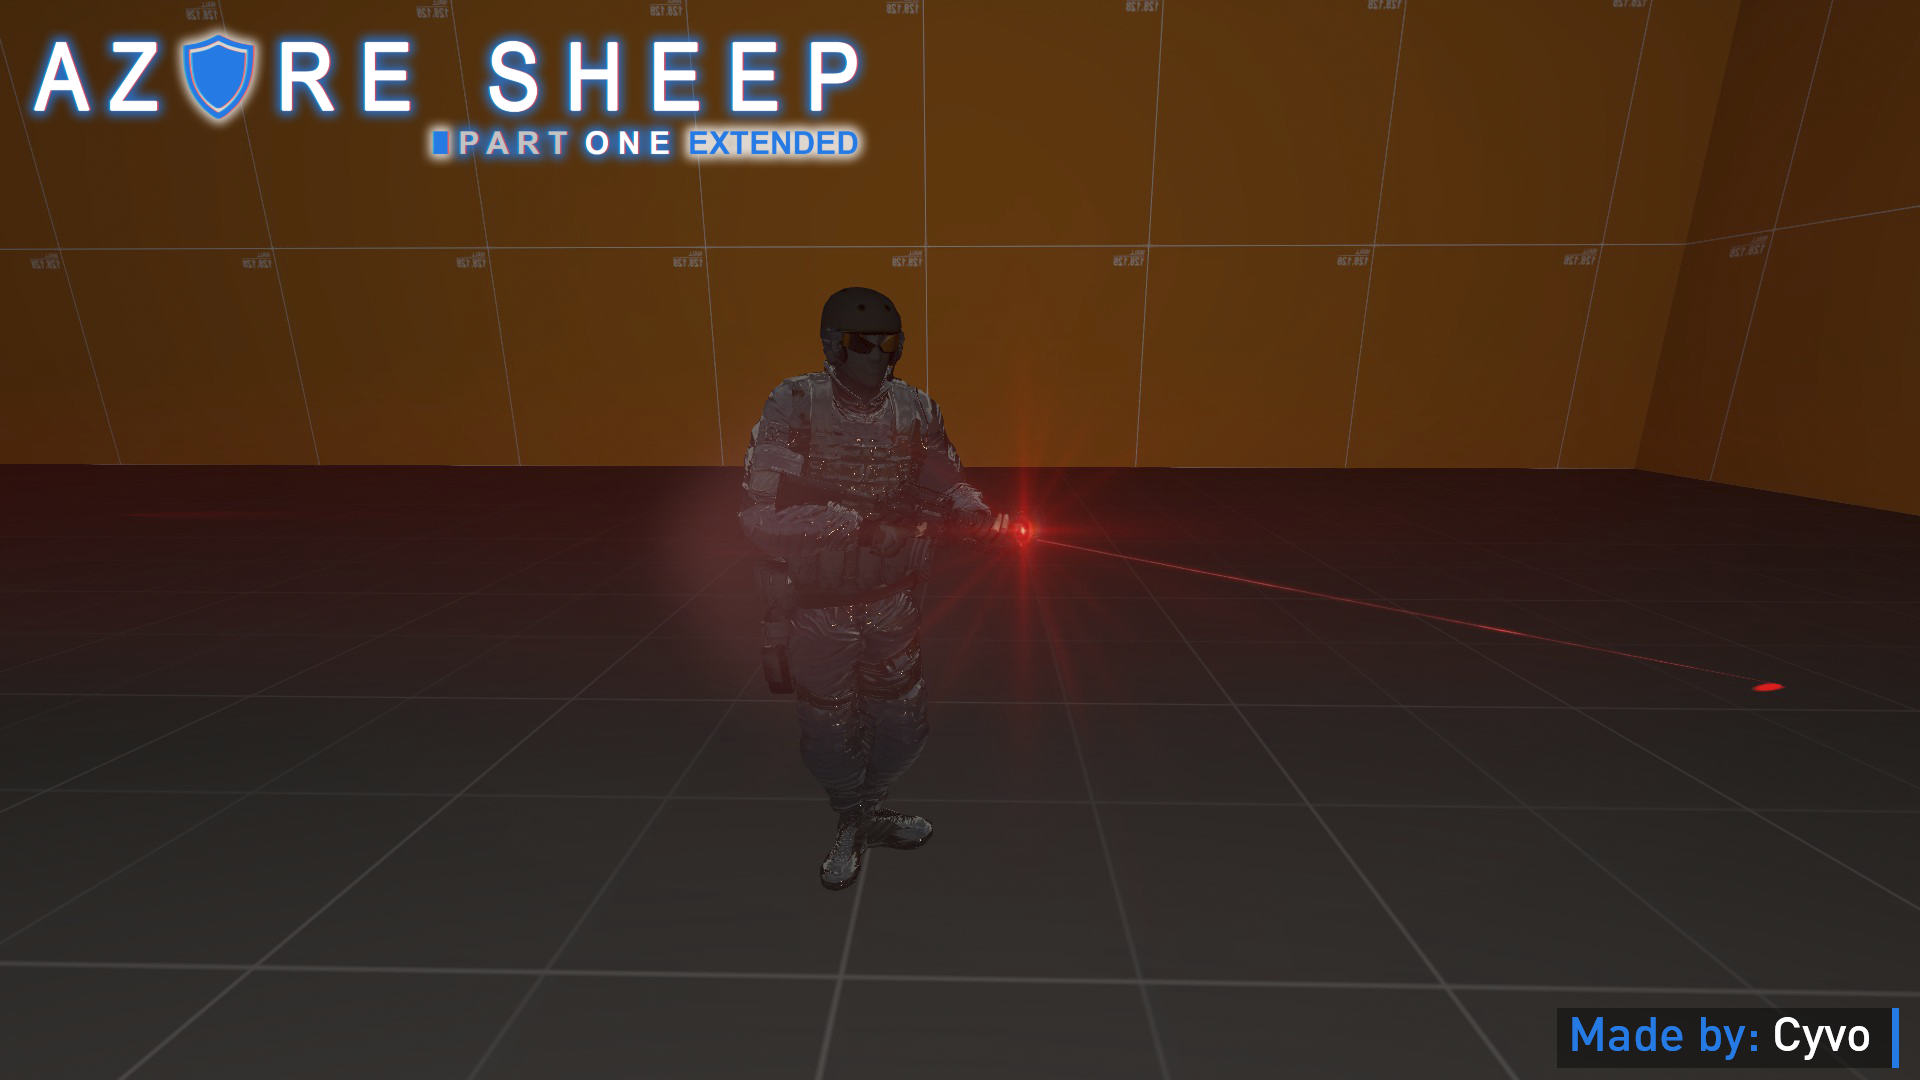 Black Mesa Windows Linux Game Mod Db - with my brother on roblox image mod db